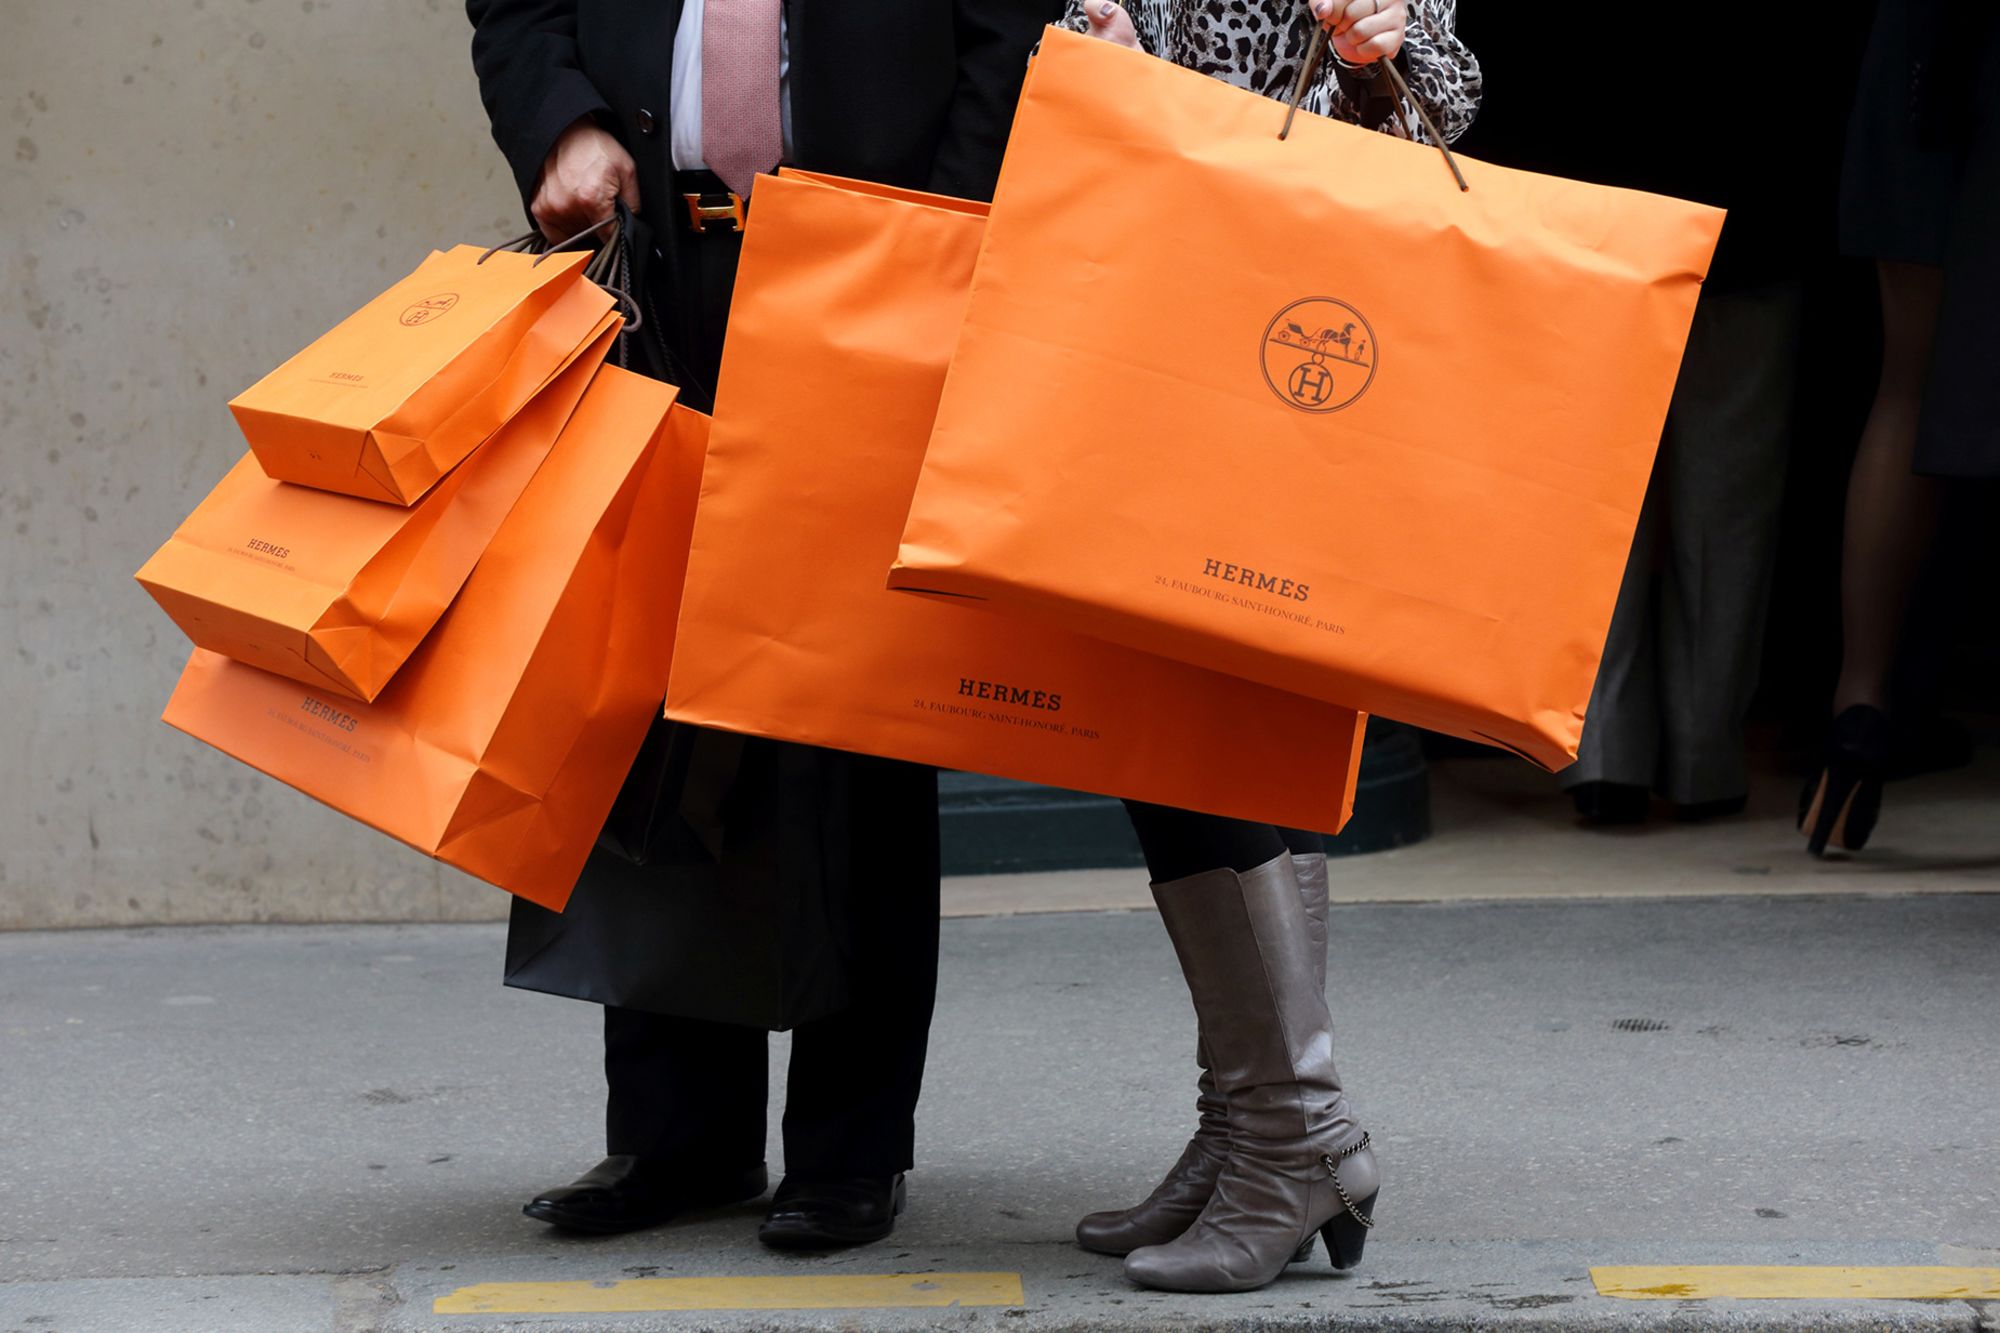 Hermès’ elusive sales strategy is at the center of a new legal challenge for the French luxury giant. Here are the practices under scrutiny and what the suit could mean for the fashion industry at large.